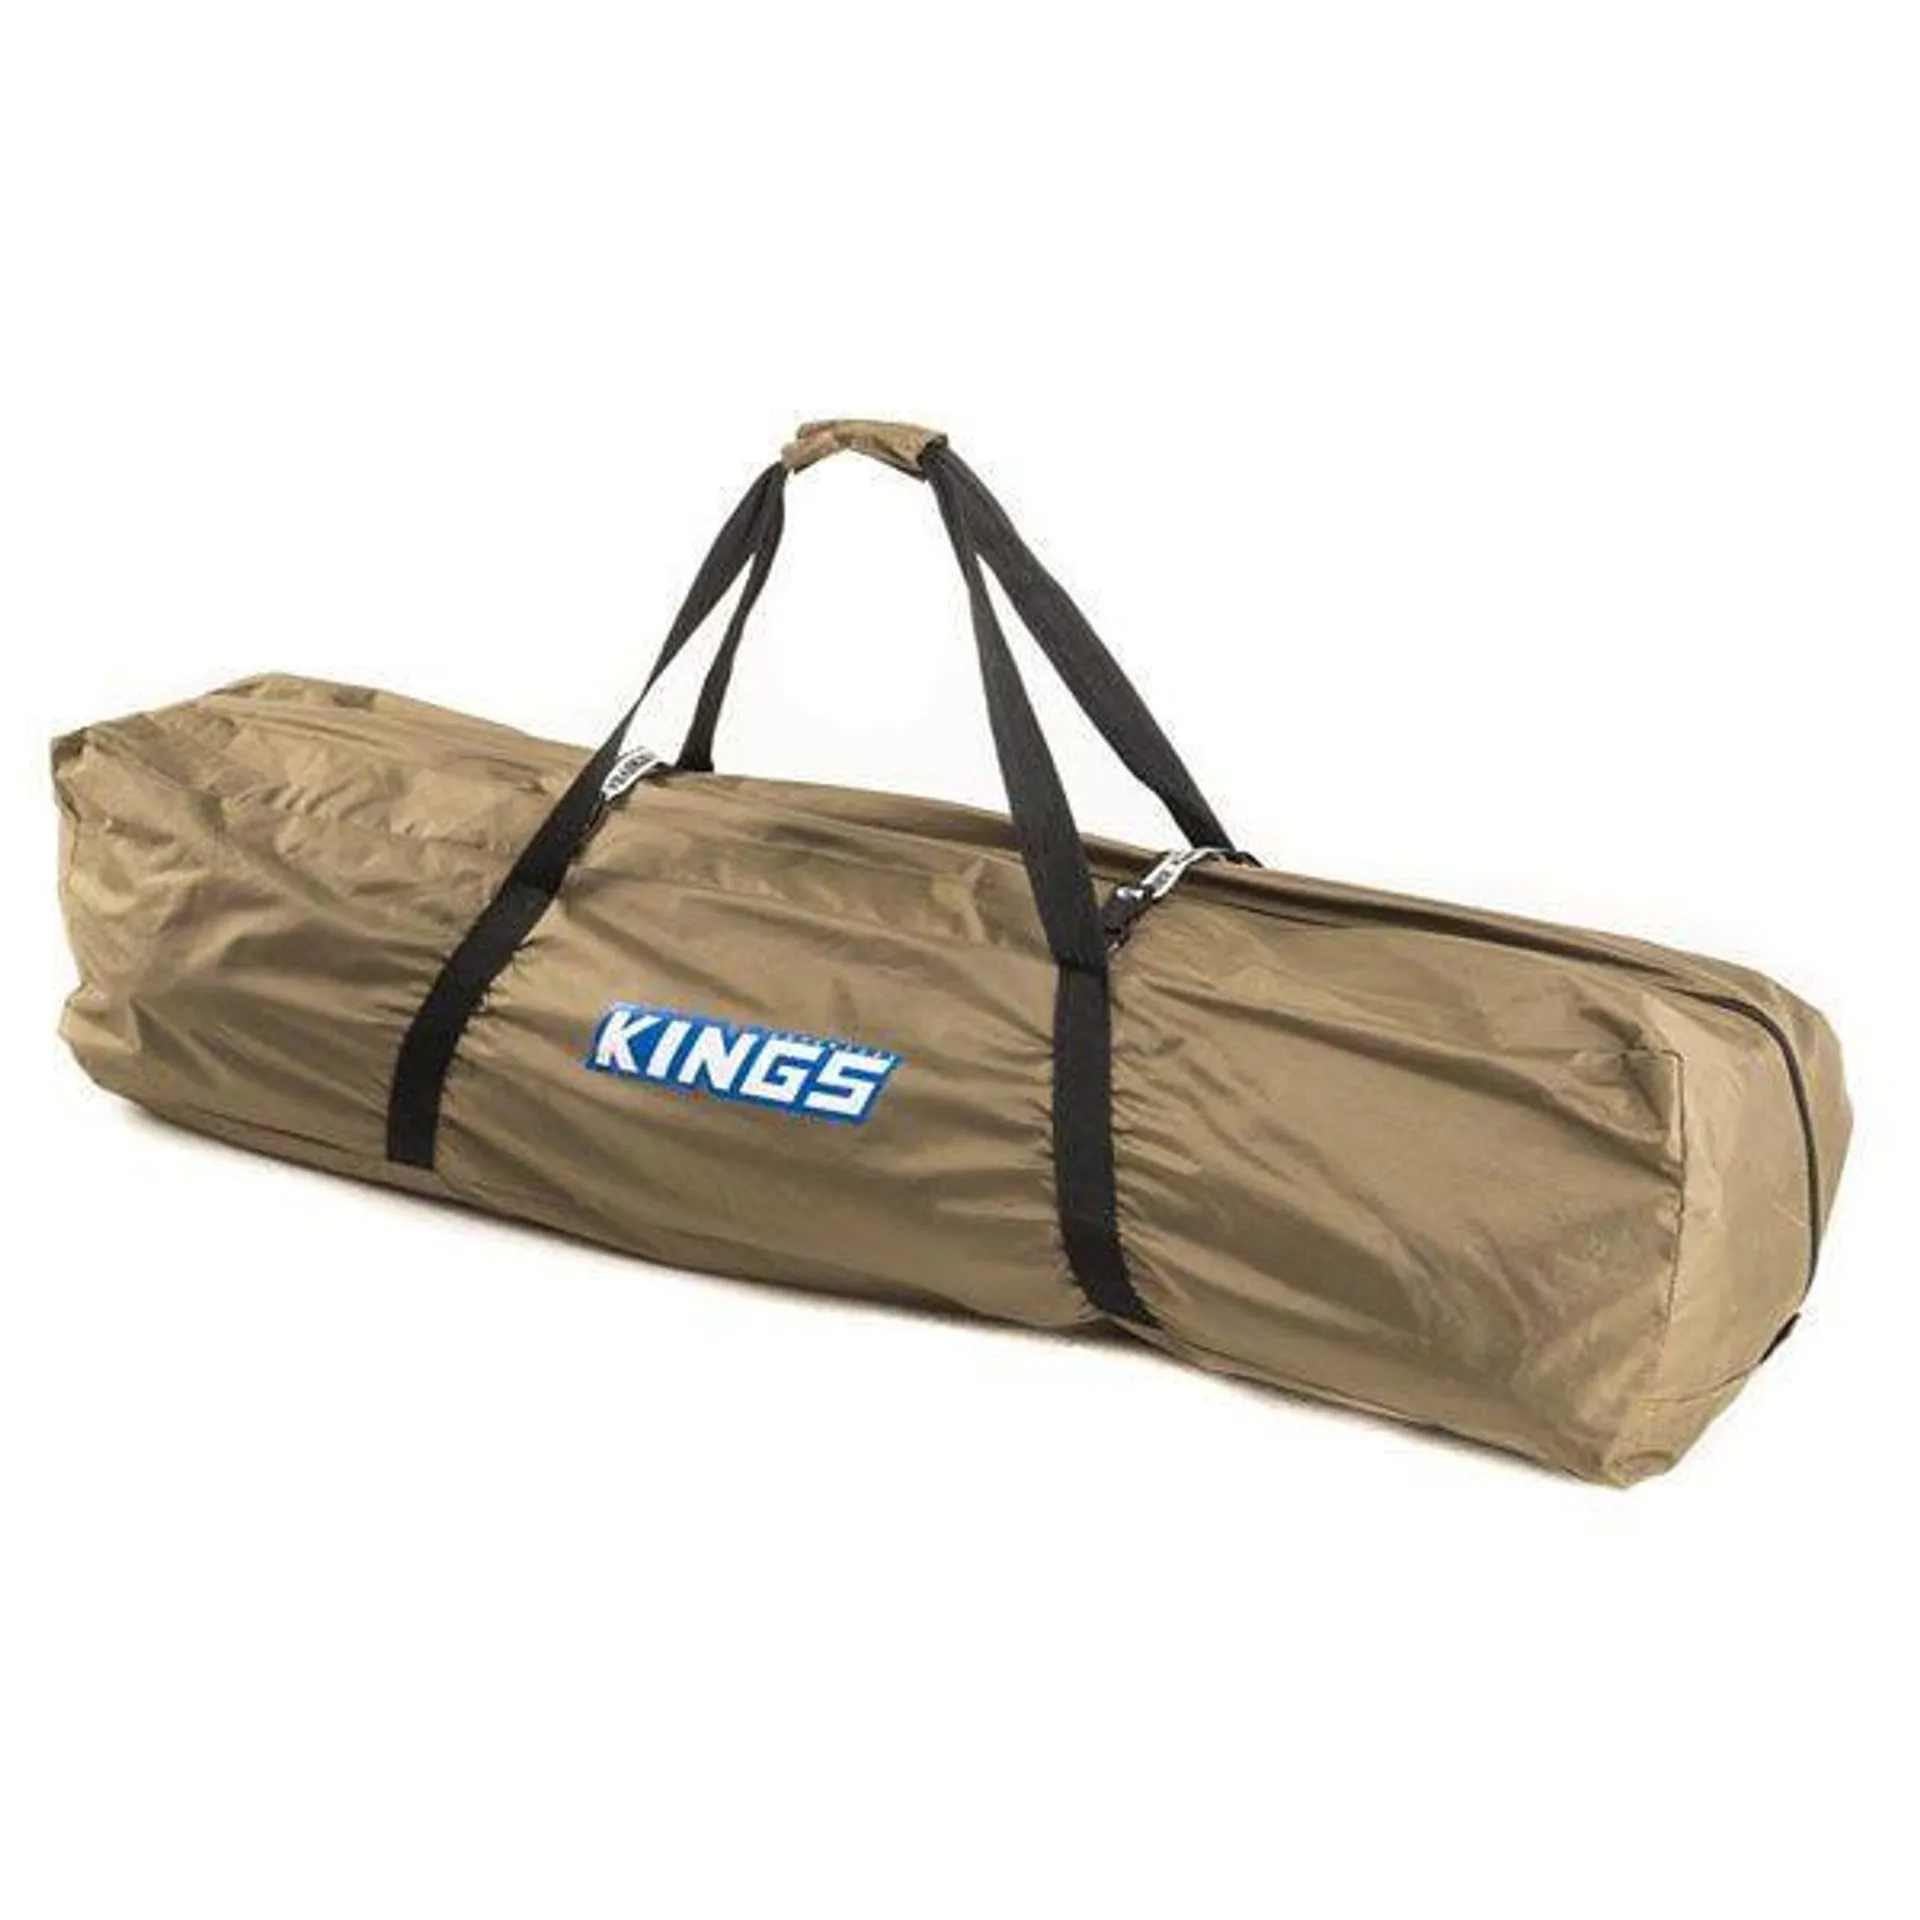 Double Swag Storage Bag | Heavy-Duty Polyester Material | Fits Big Daddy Double Swag | Water/Dust Resistant